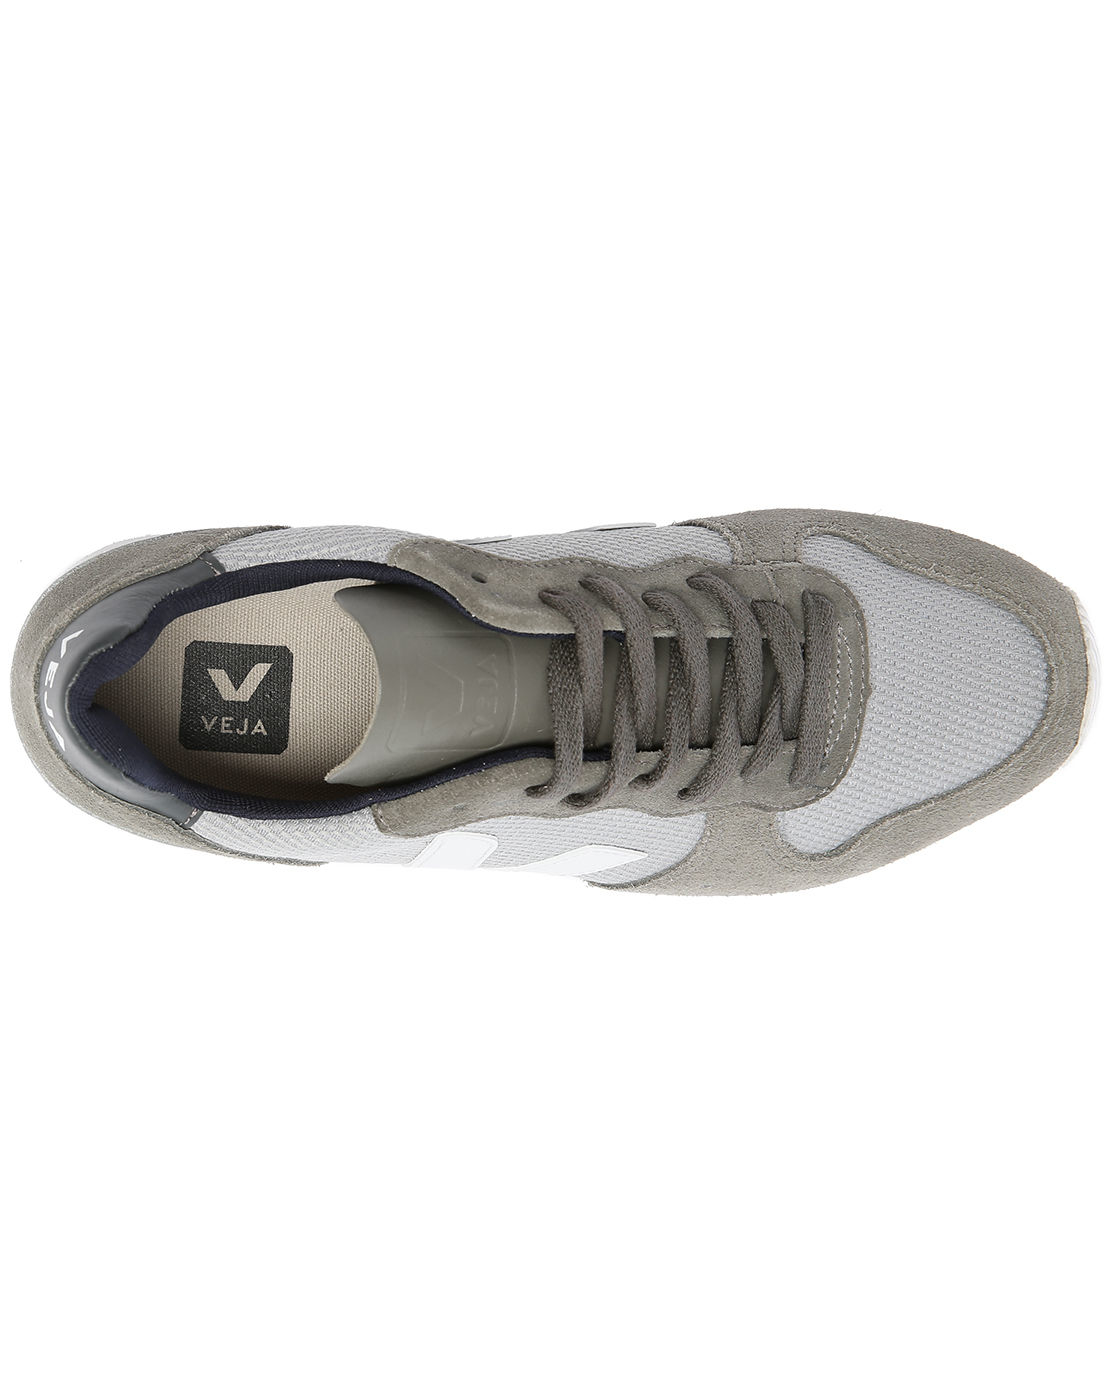 Veja Holiday Grey Mesh/suede Sneakers in Gray for Men (grey) | Lyst